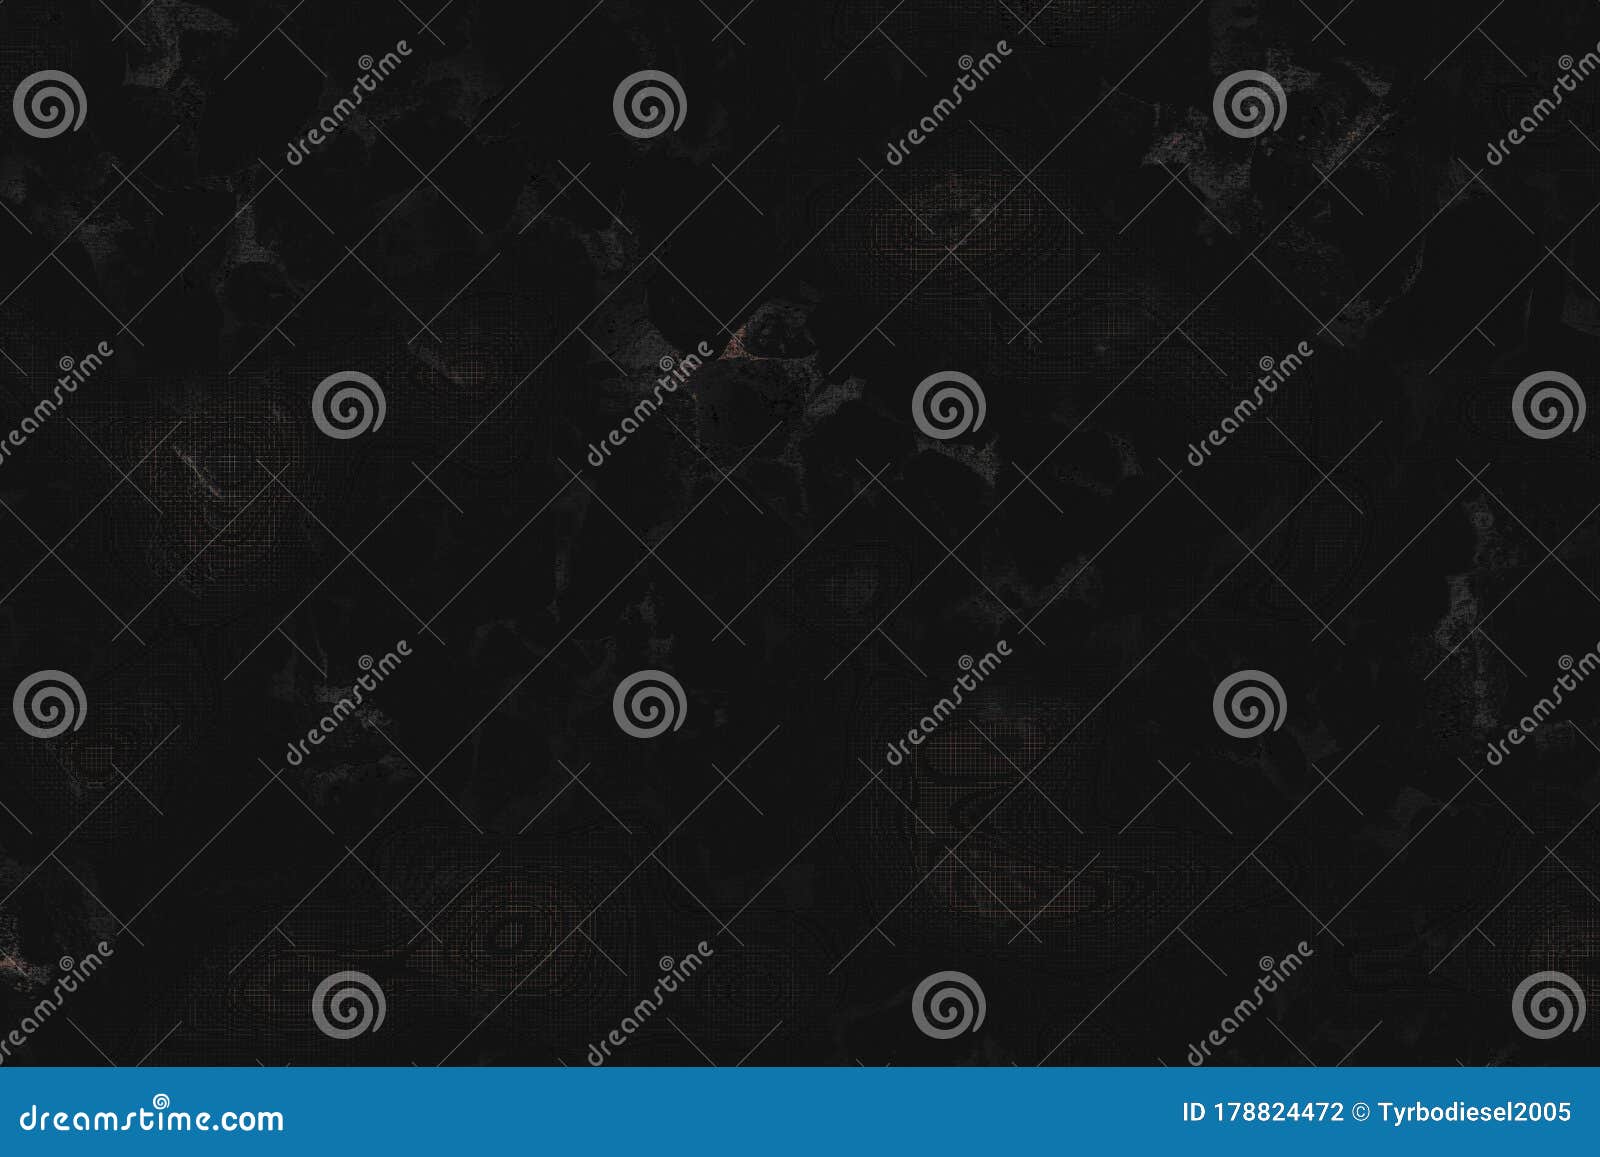 matte black abstract background, business style